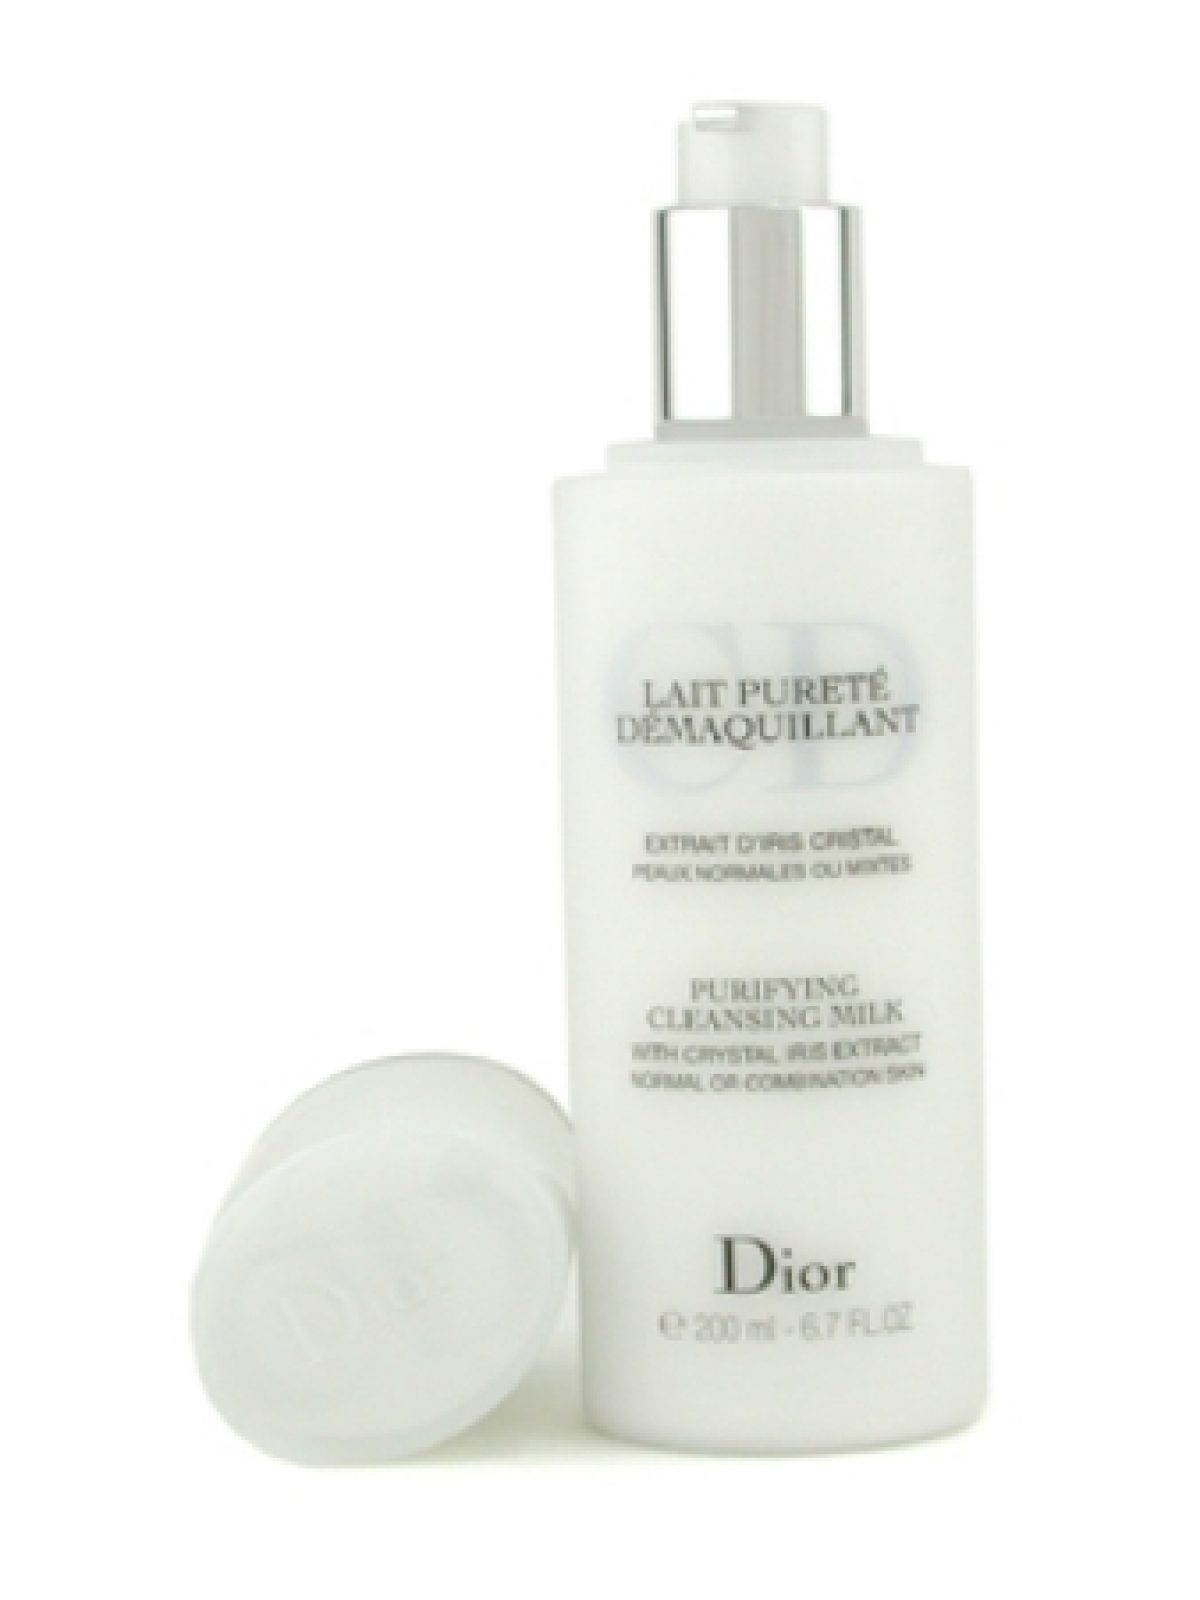 Christian-Dior-Purifying-Cleansing-Milk-Normal-Combination-Skin-200ml-6-7oz